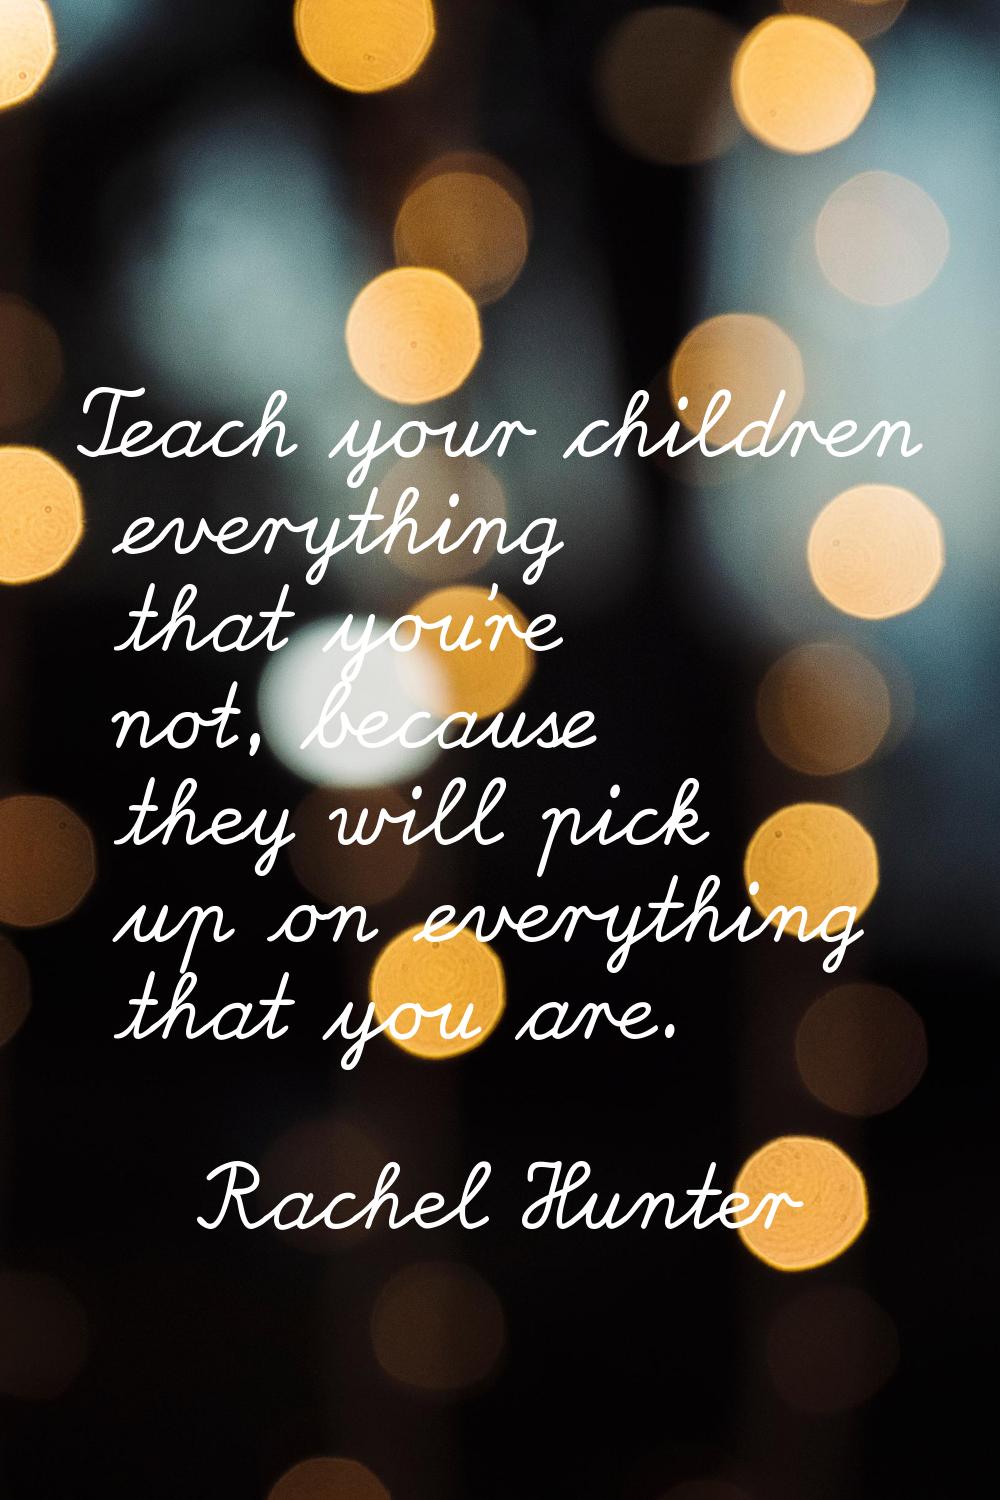 Teach your children everything that you're not, because they will pick up on everything that you ar